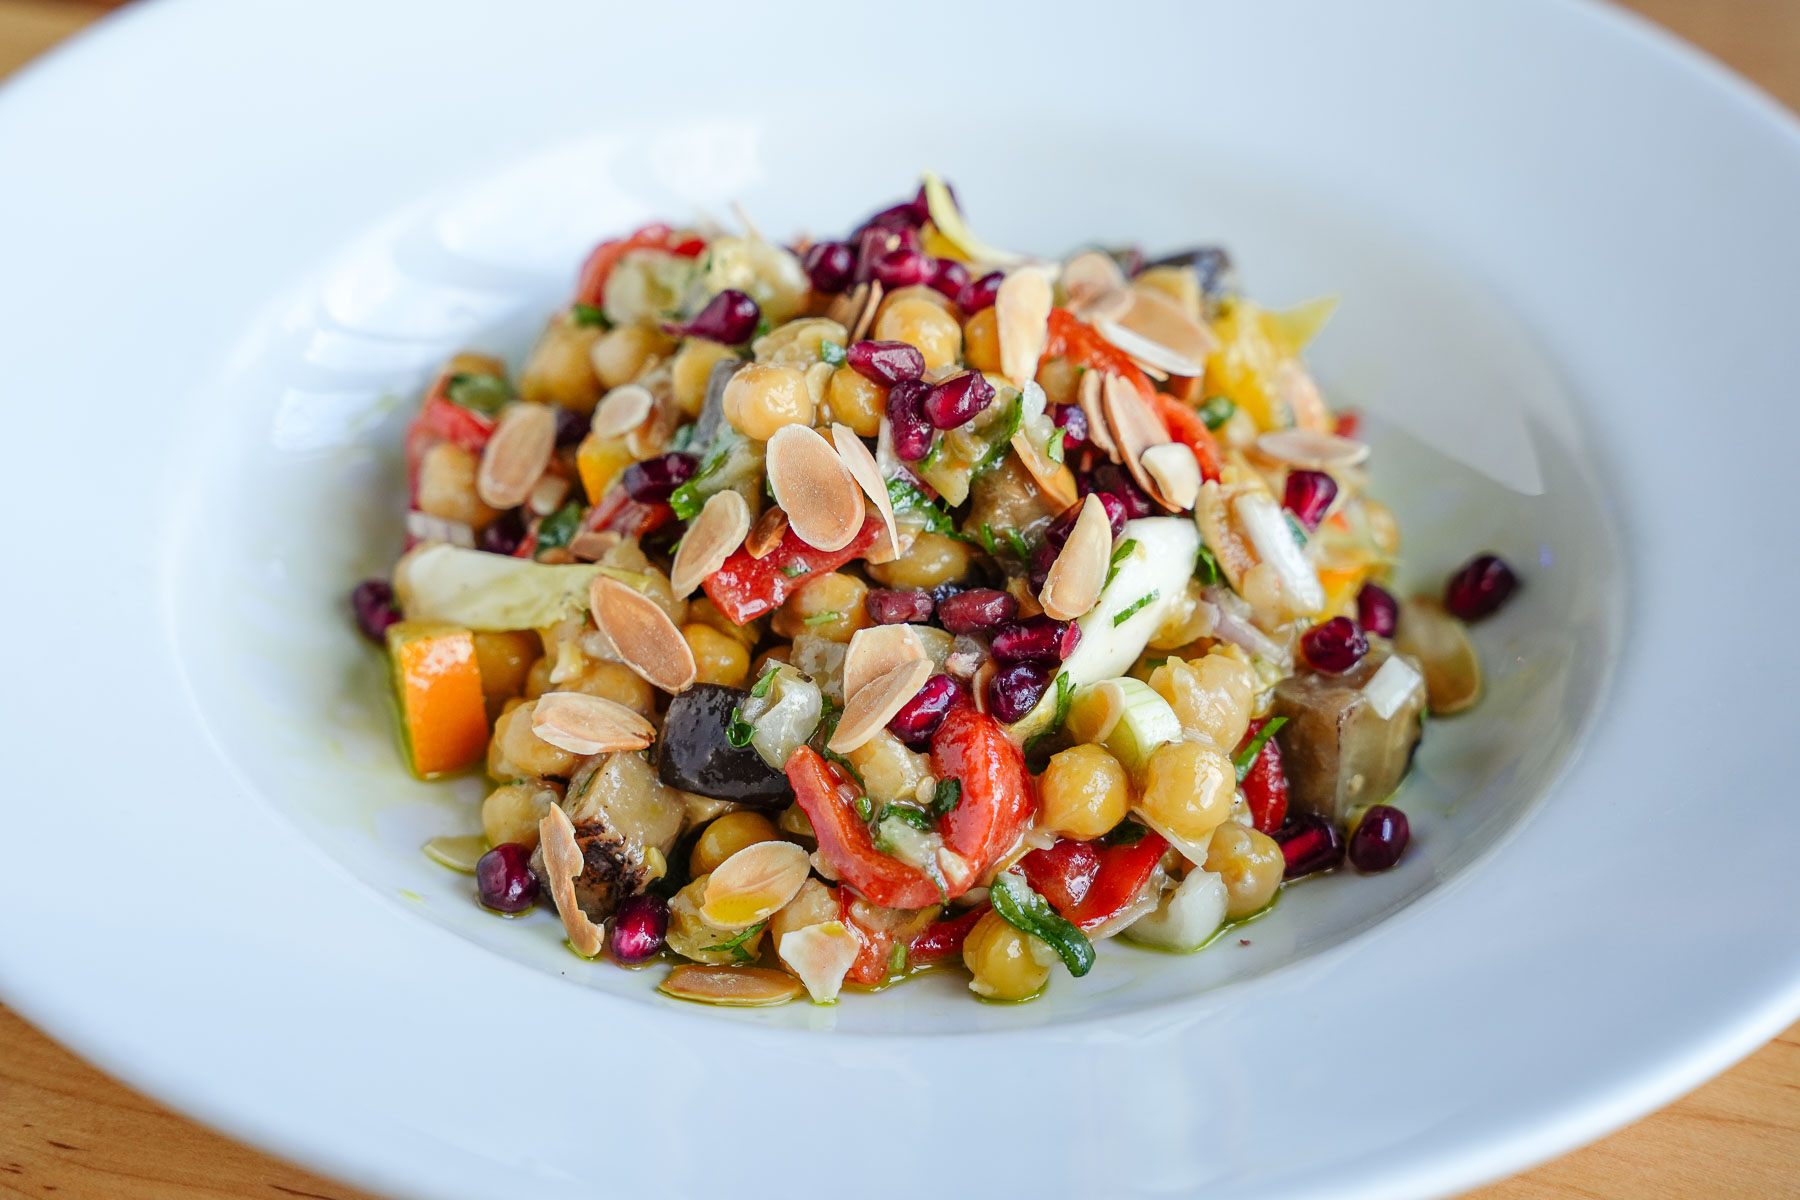 Sicilian Chickpea Salad from The Daily Catch Menu A refreshing taste of Sicily. Fire Roasted Red Peppers, Eggplant, Scallions, Toasted Almonds & Preserved Lemon.